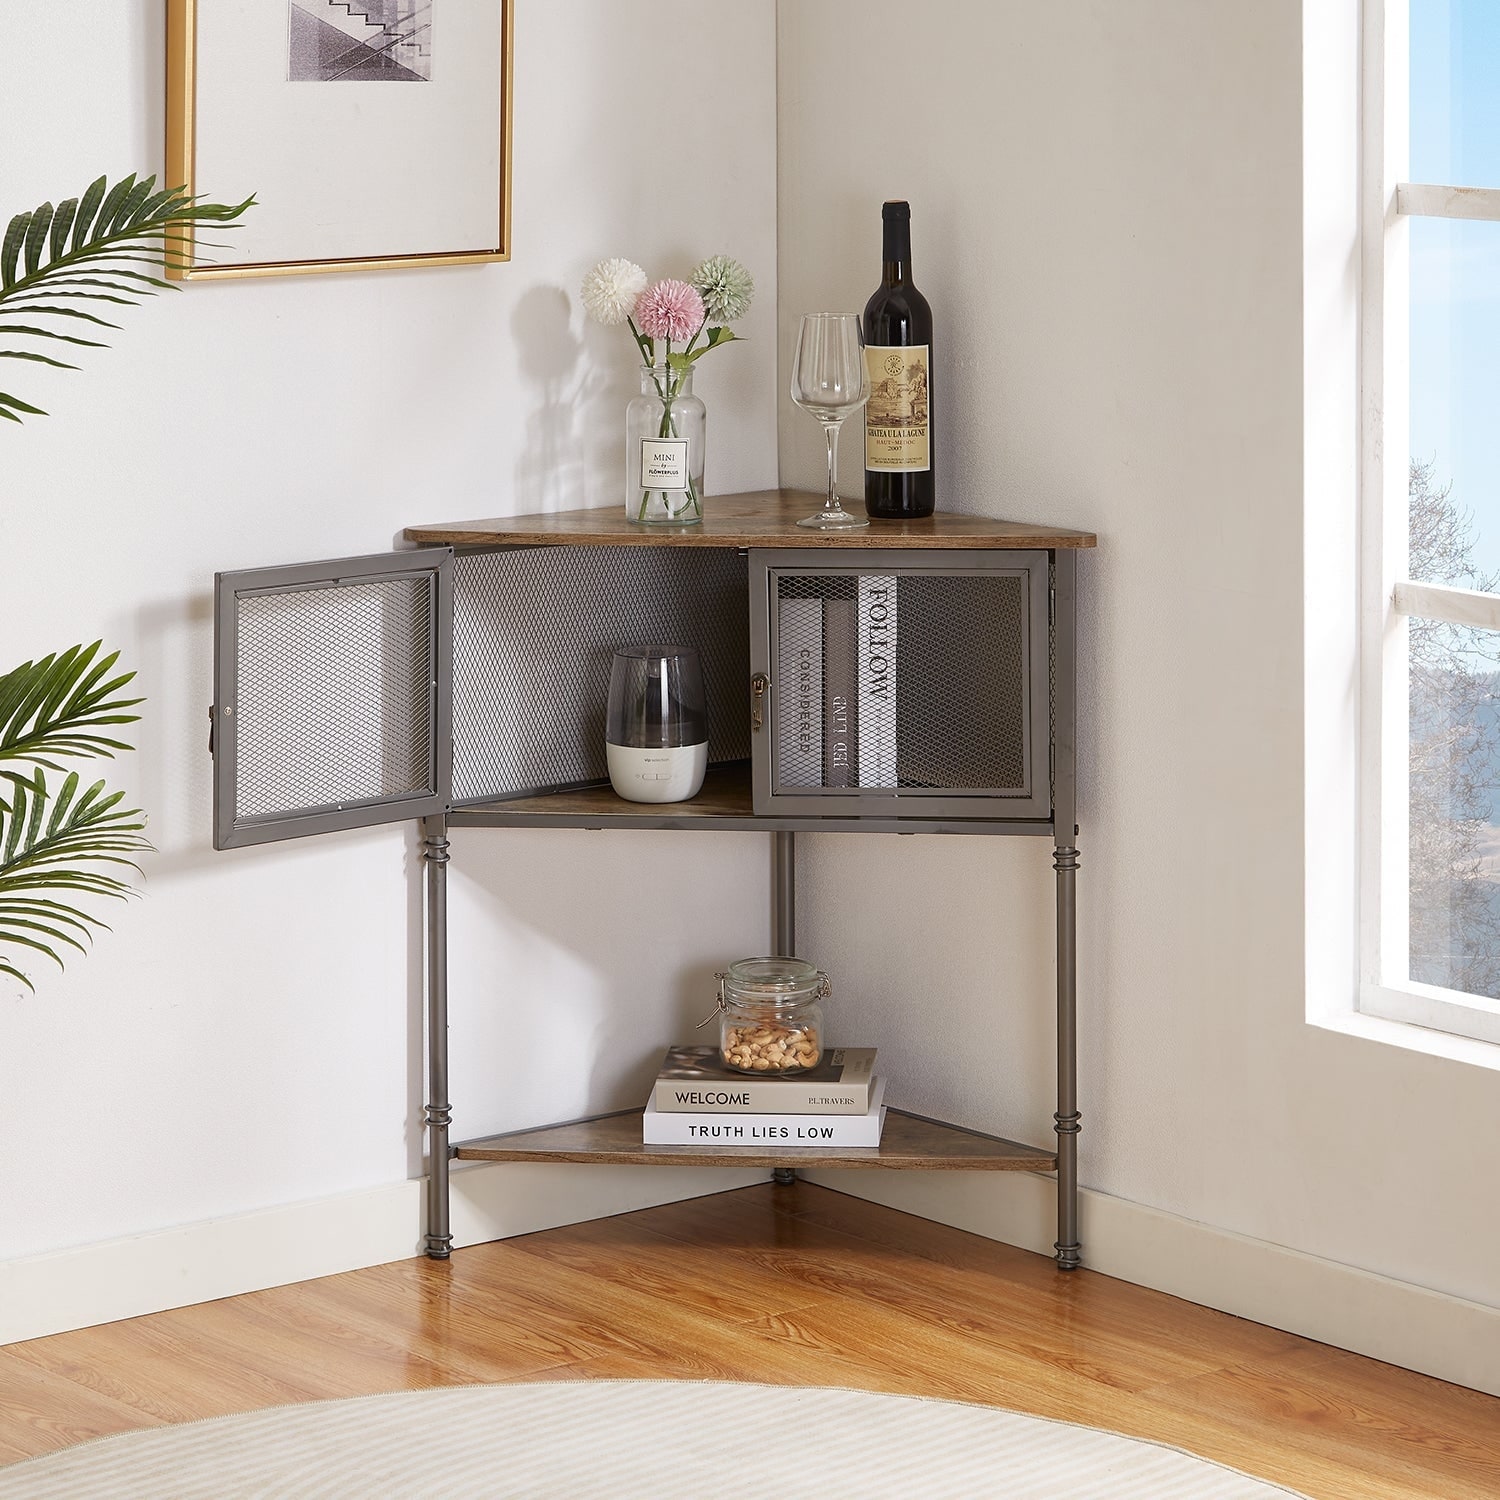 https://ak1.ostkcdn.com/images/products/is/images/direct/d1d1cf7bd65c44e28ec03bb5b6c100e340e4c470/VECELO-3-Tier-Corner-Shelf-with-Storage-Cabinet-and-Doors.jpg